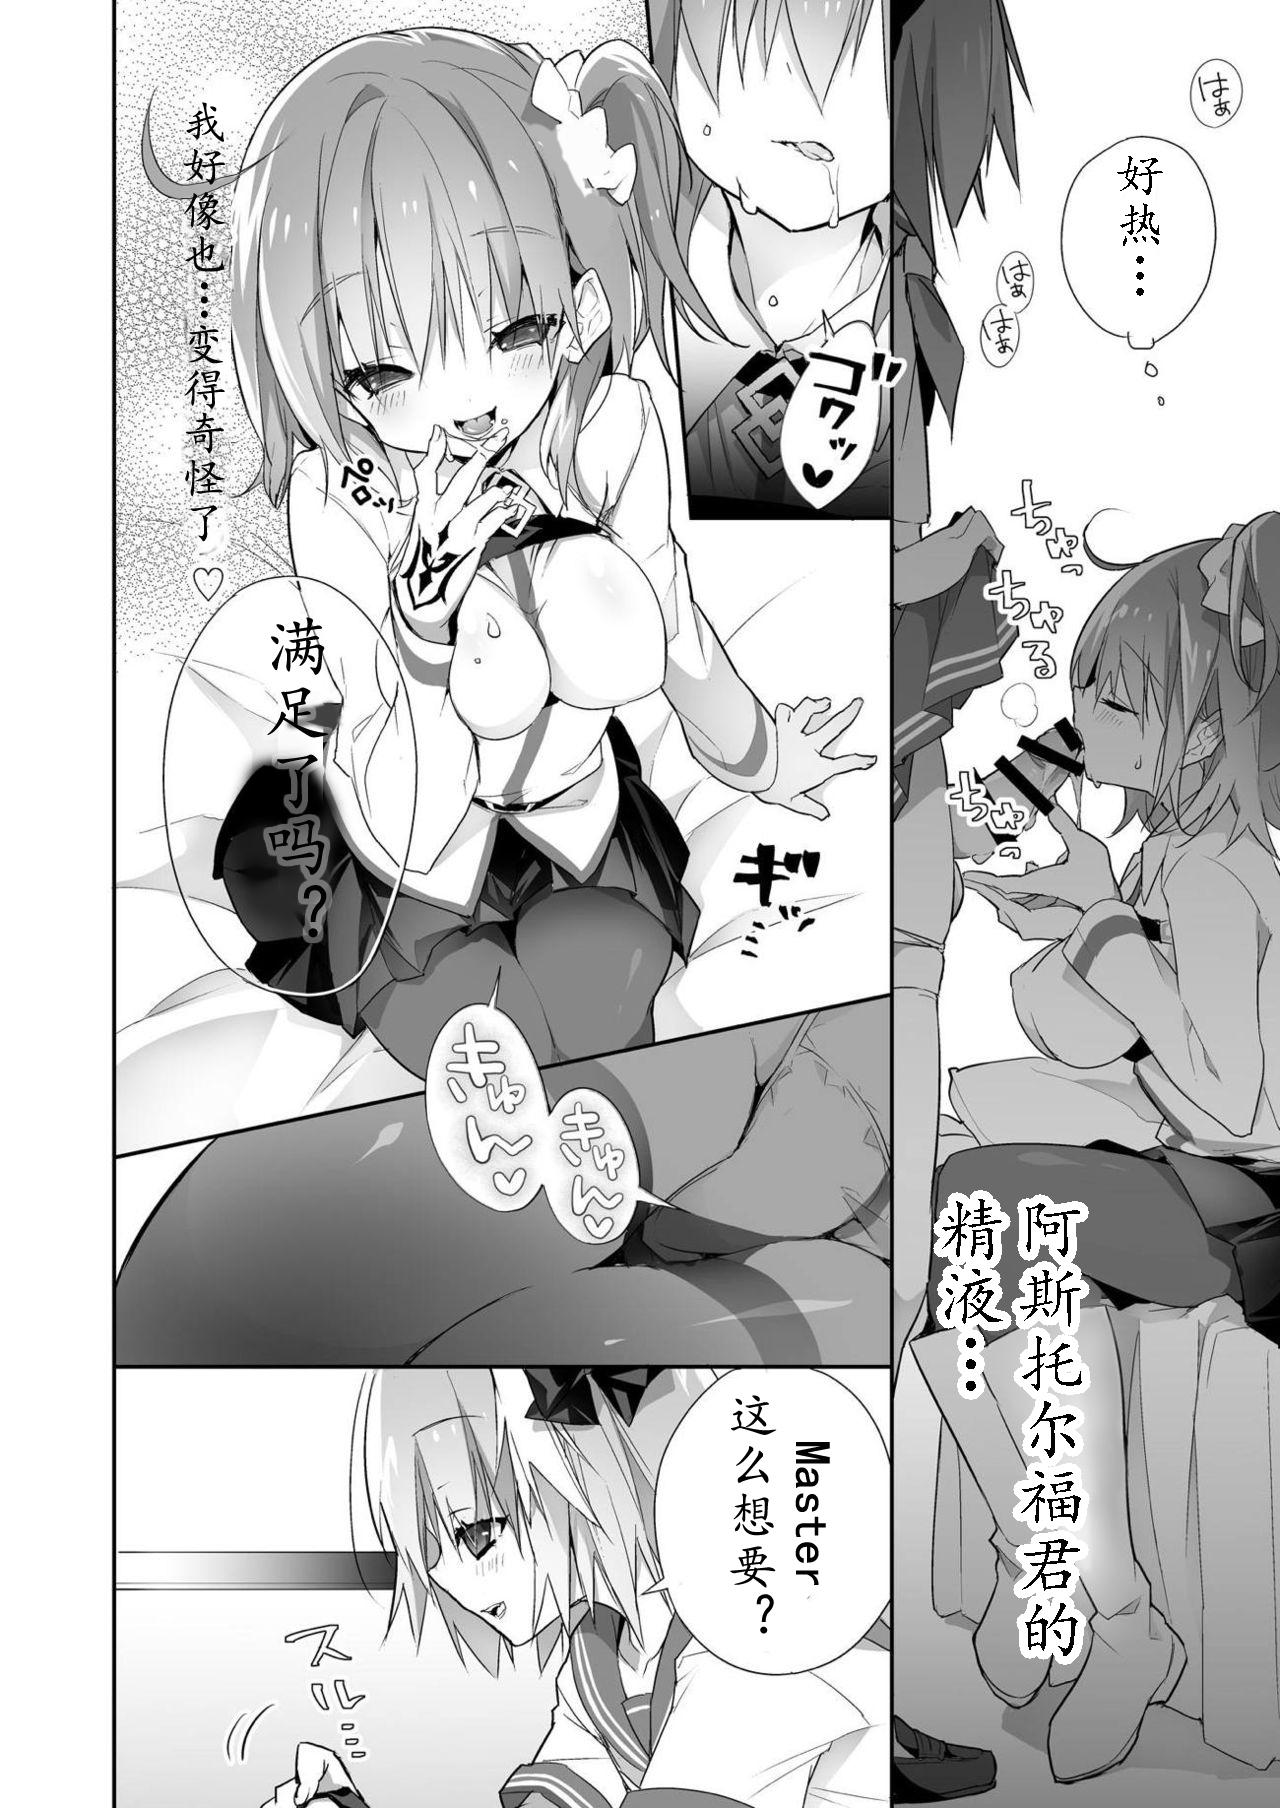 Orgy Kumadea no my Room - Fate grand order Young Petite Porn - Page 8